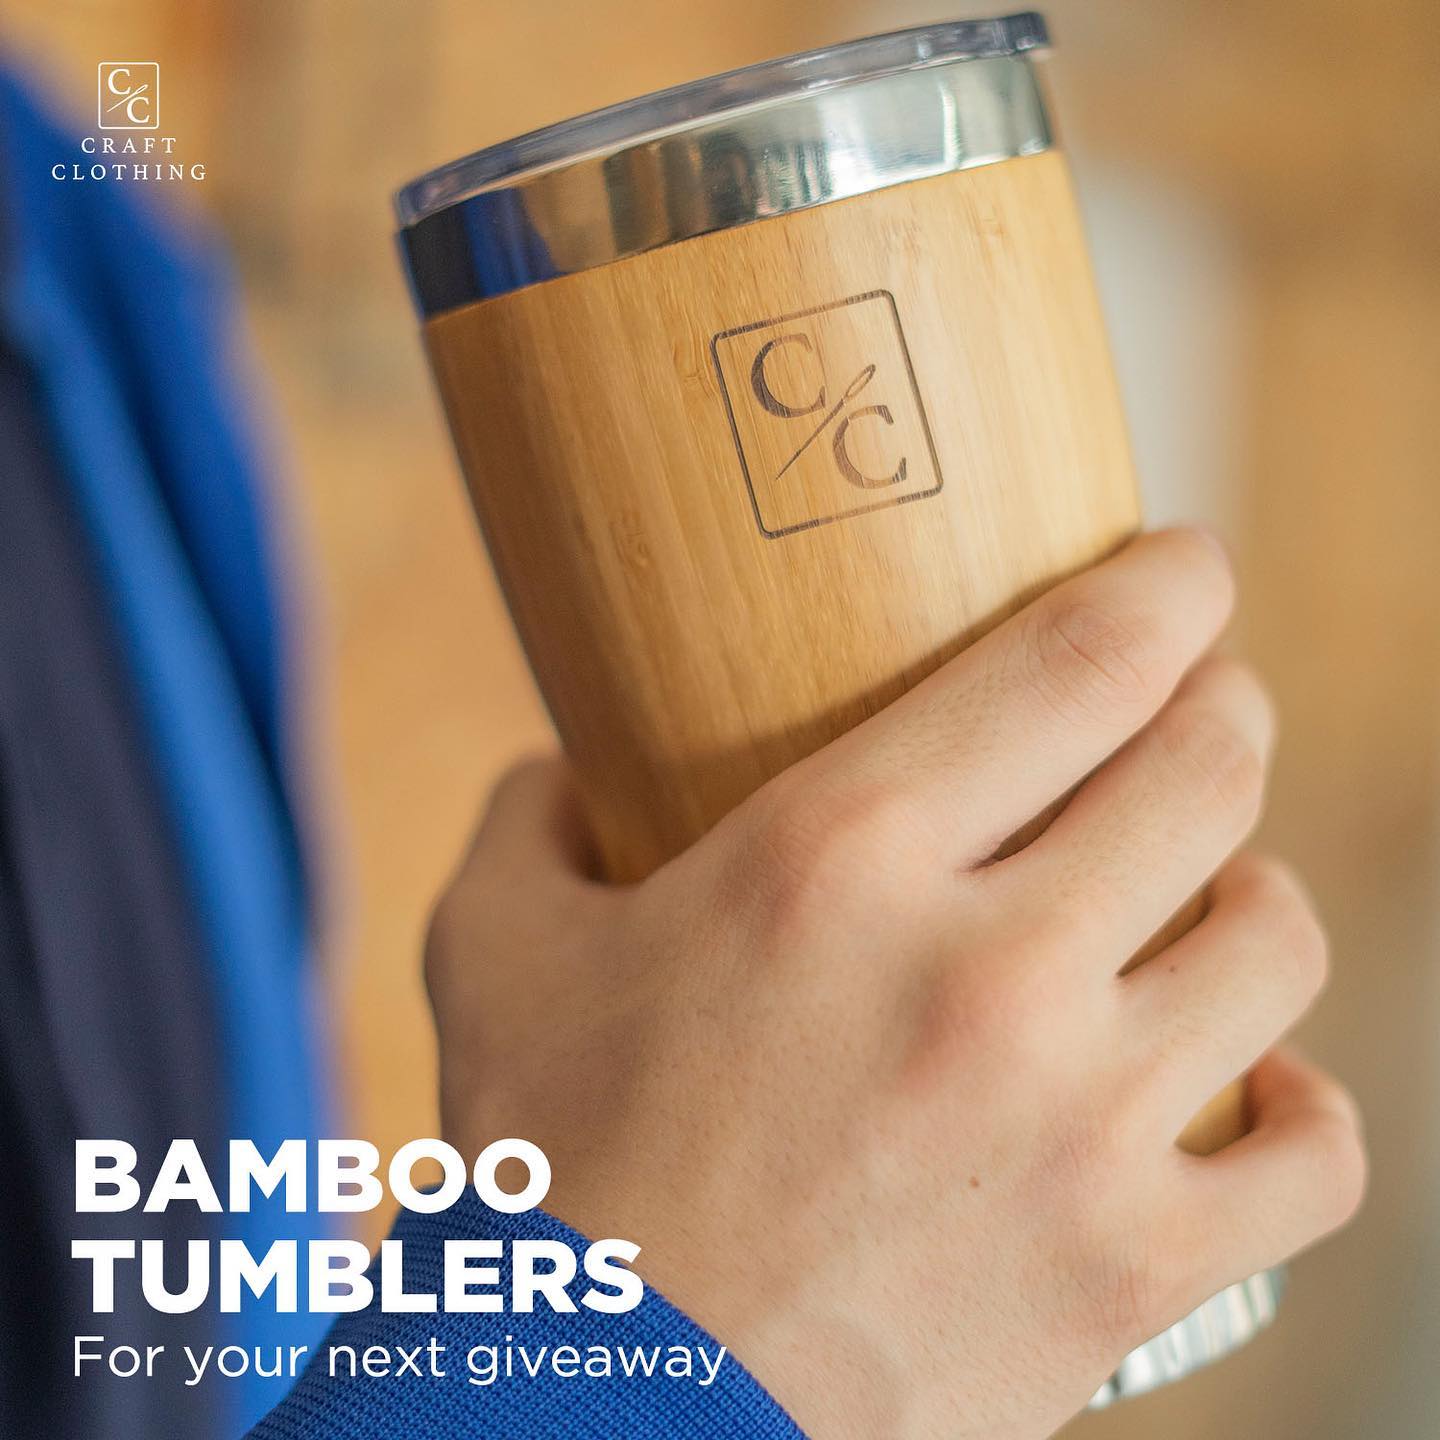 Bamboo Tumblers For your Next Giveaway